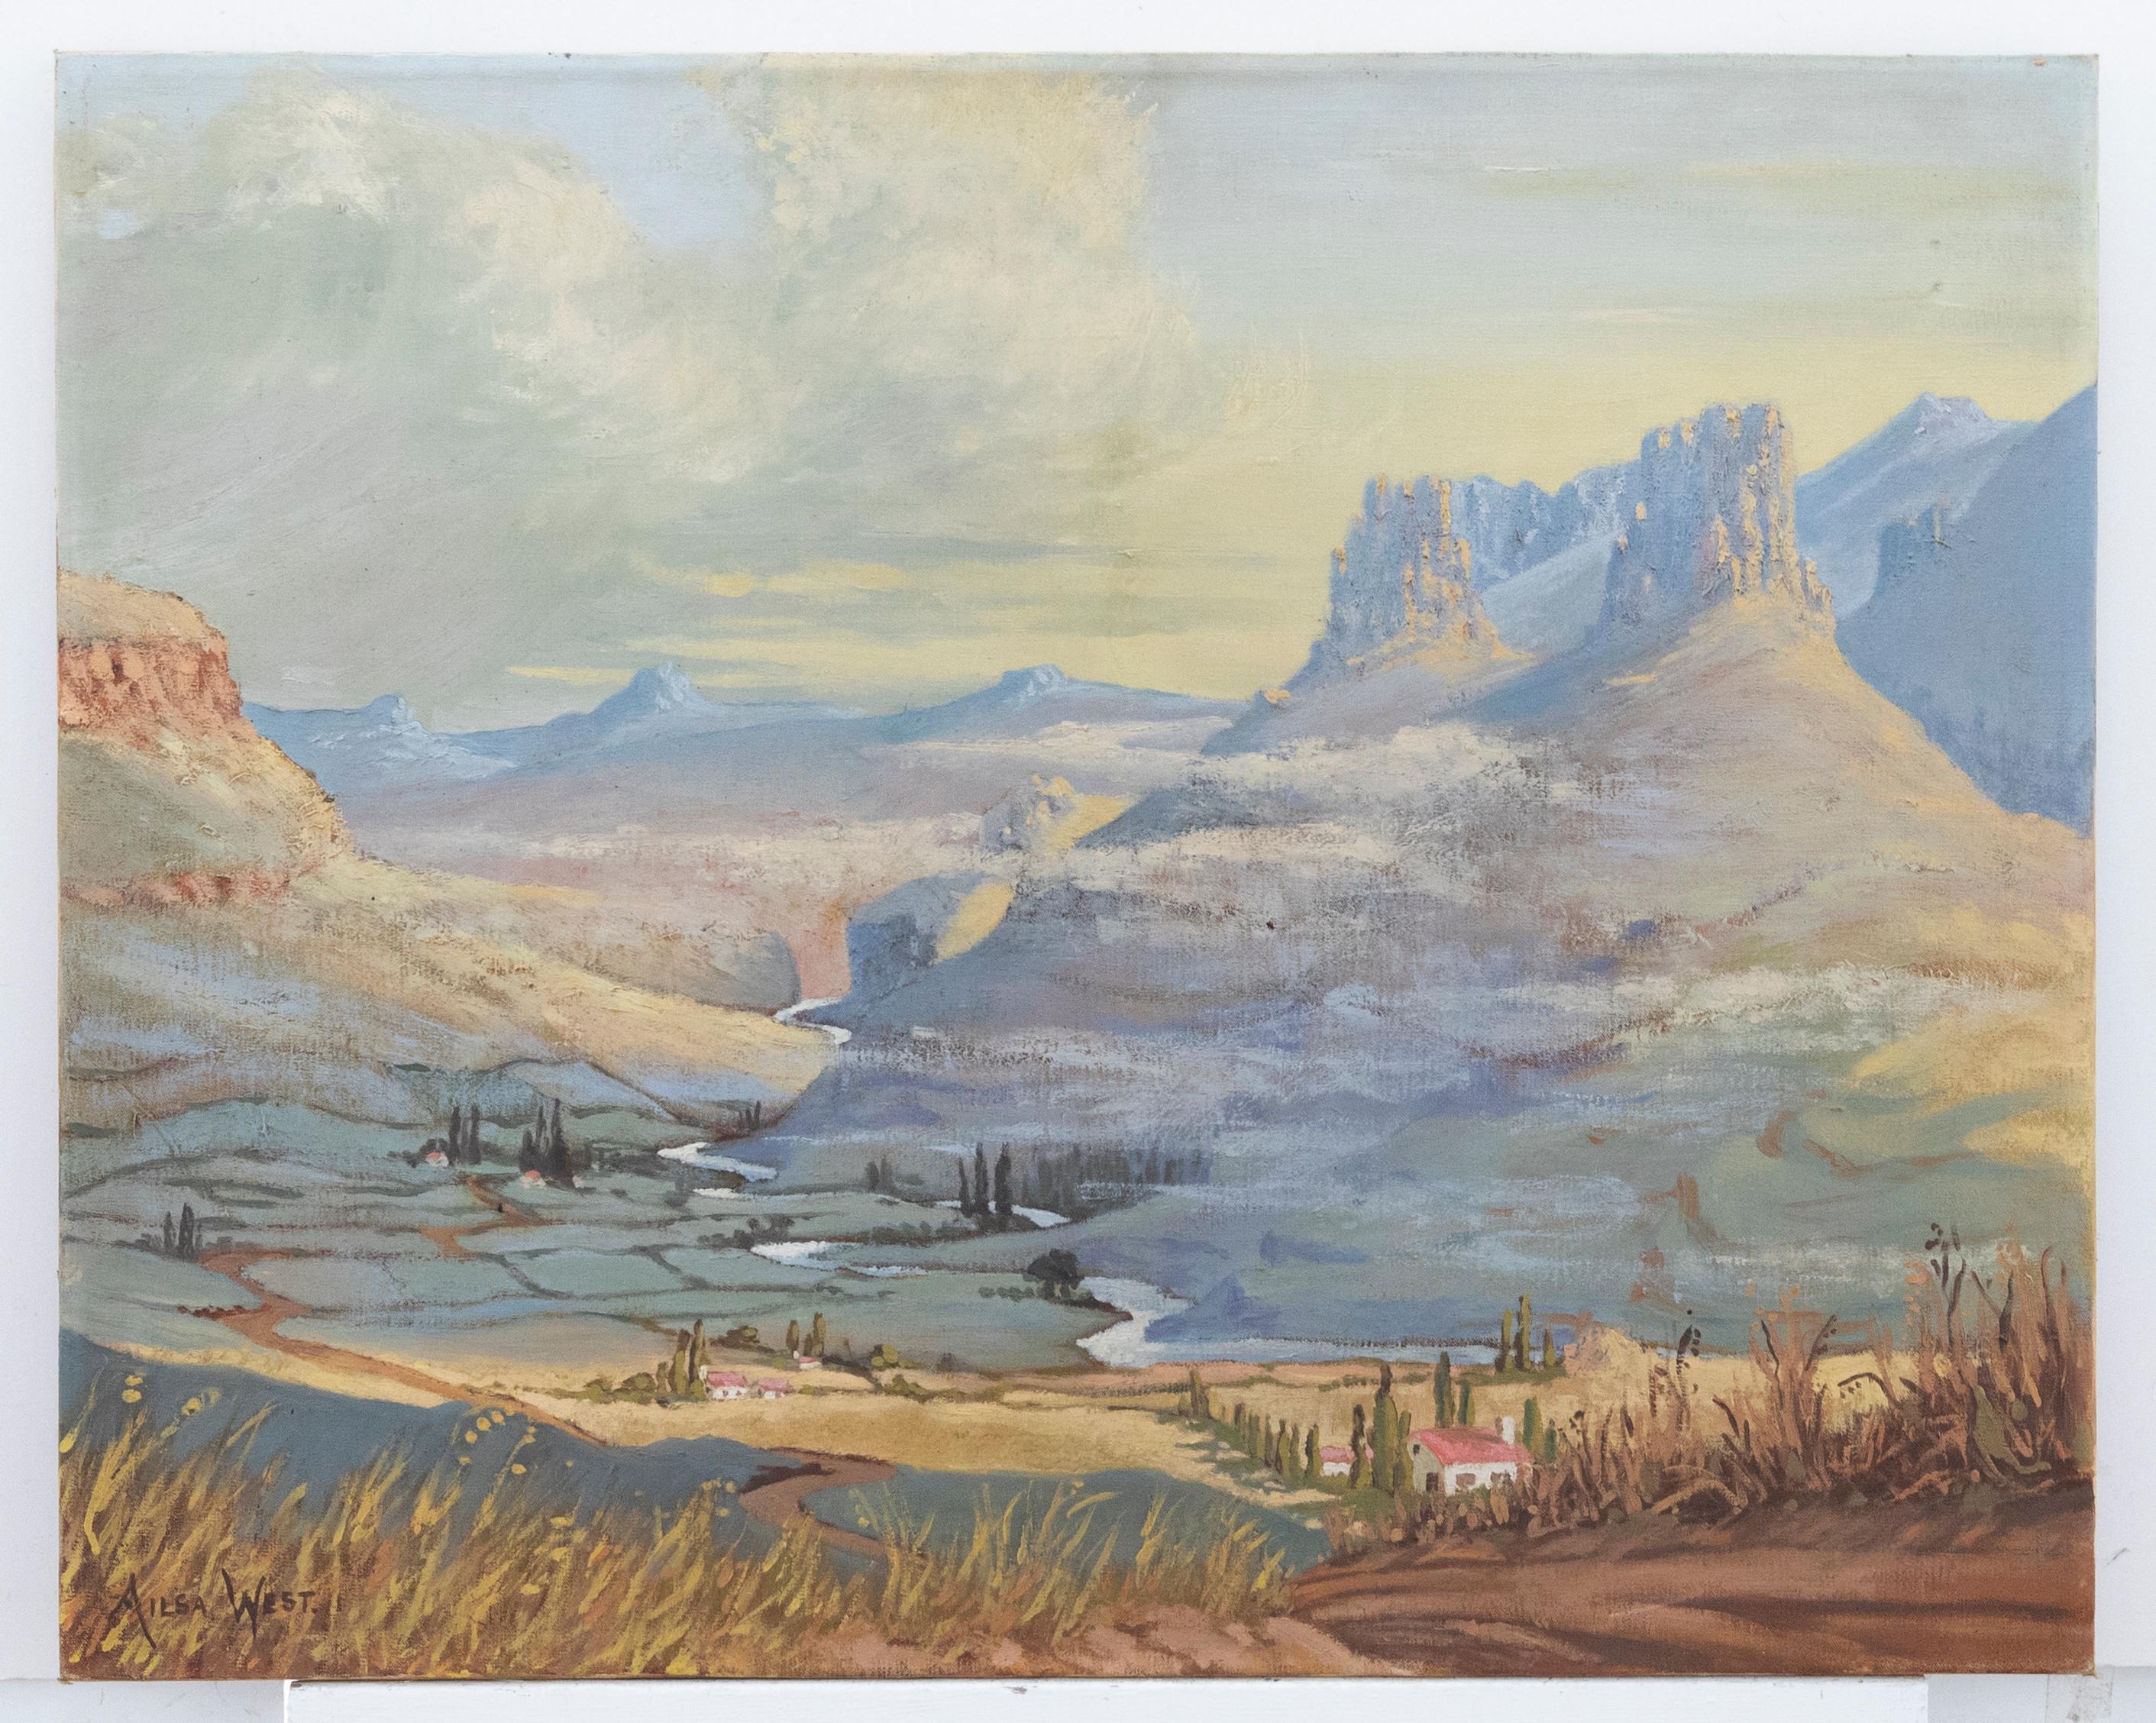 Ailsa West - American  Mid 20th Century Oil, North American Landscape - Painting by Unknown